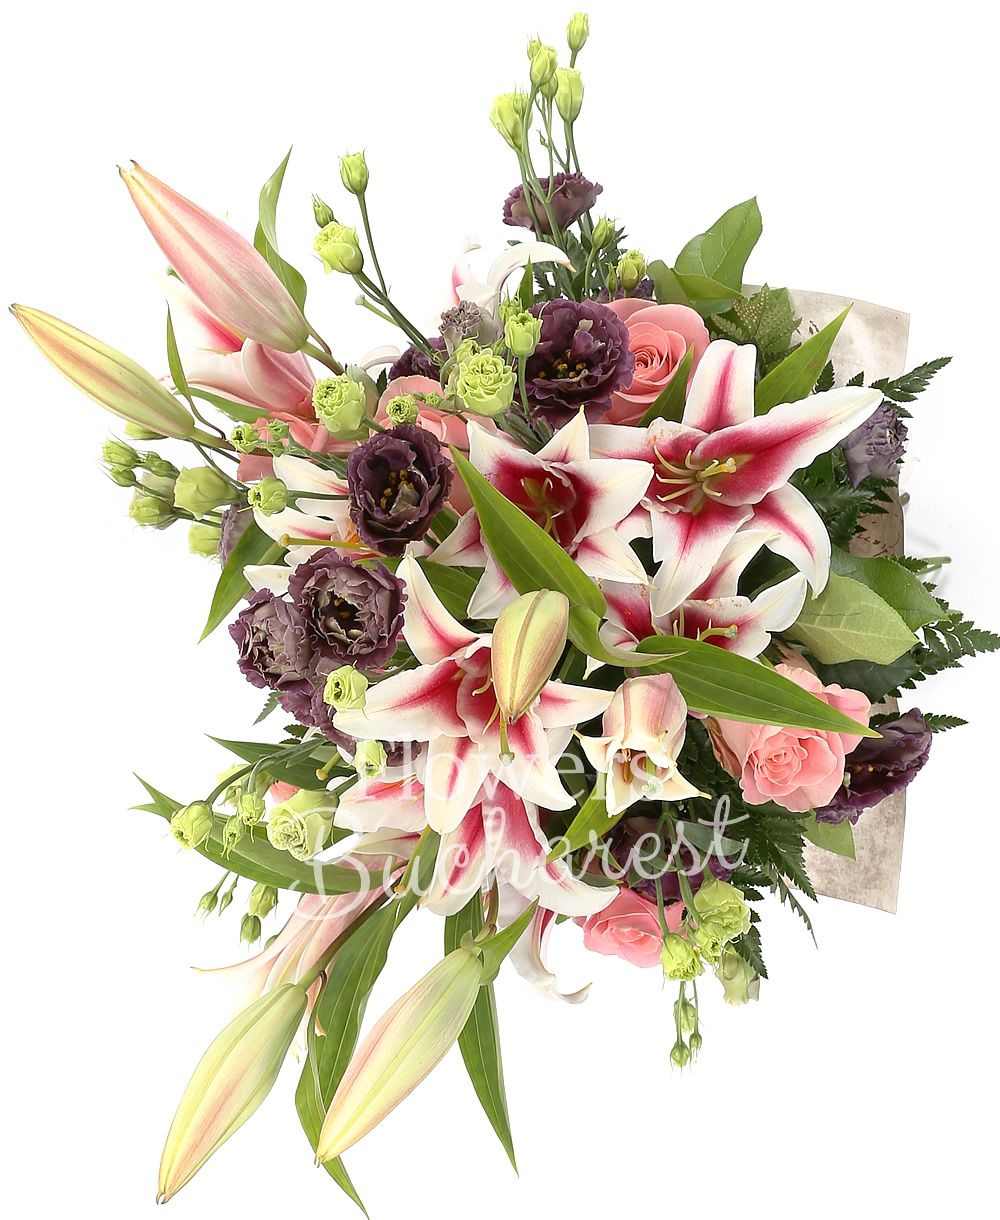 7 pink roses, 3 pink lilies, 7 lisianthus, greenery